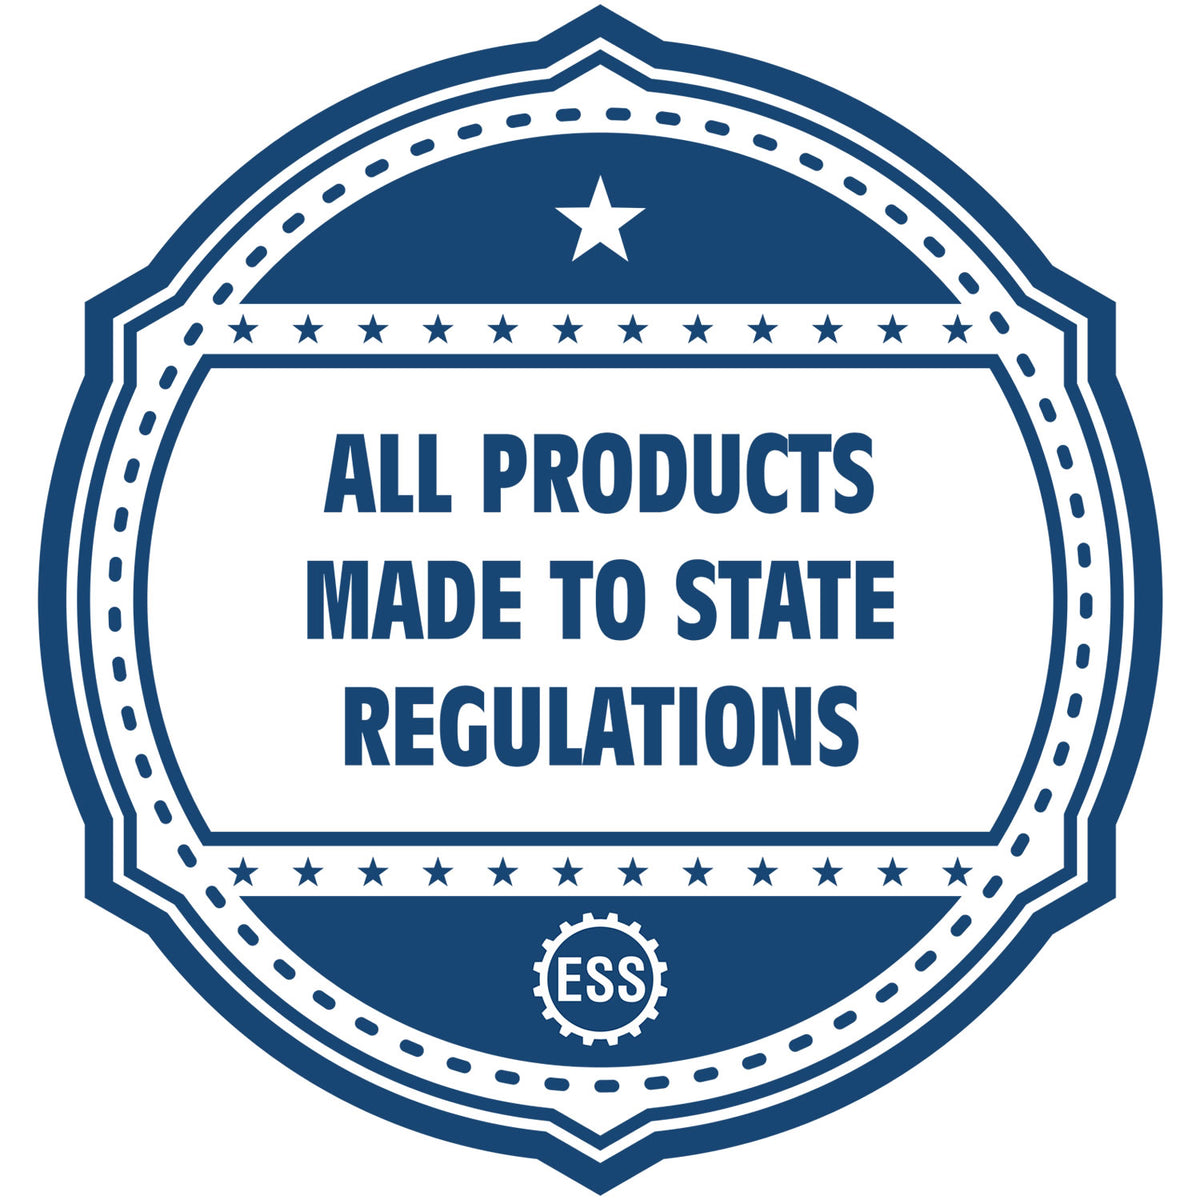 An icon or badge element for the Super Slim Puerto Rico Notary Public Stamp showing that this product is made in compliance with state regulations.